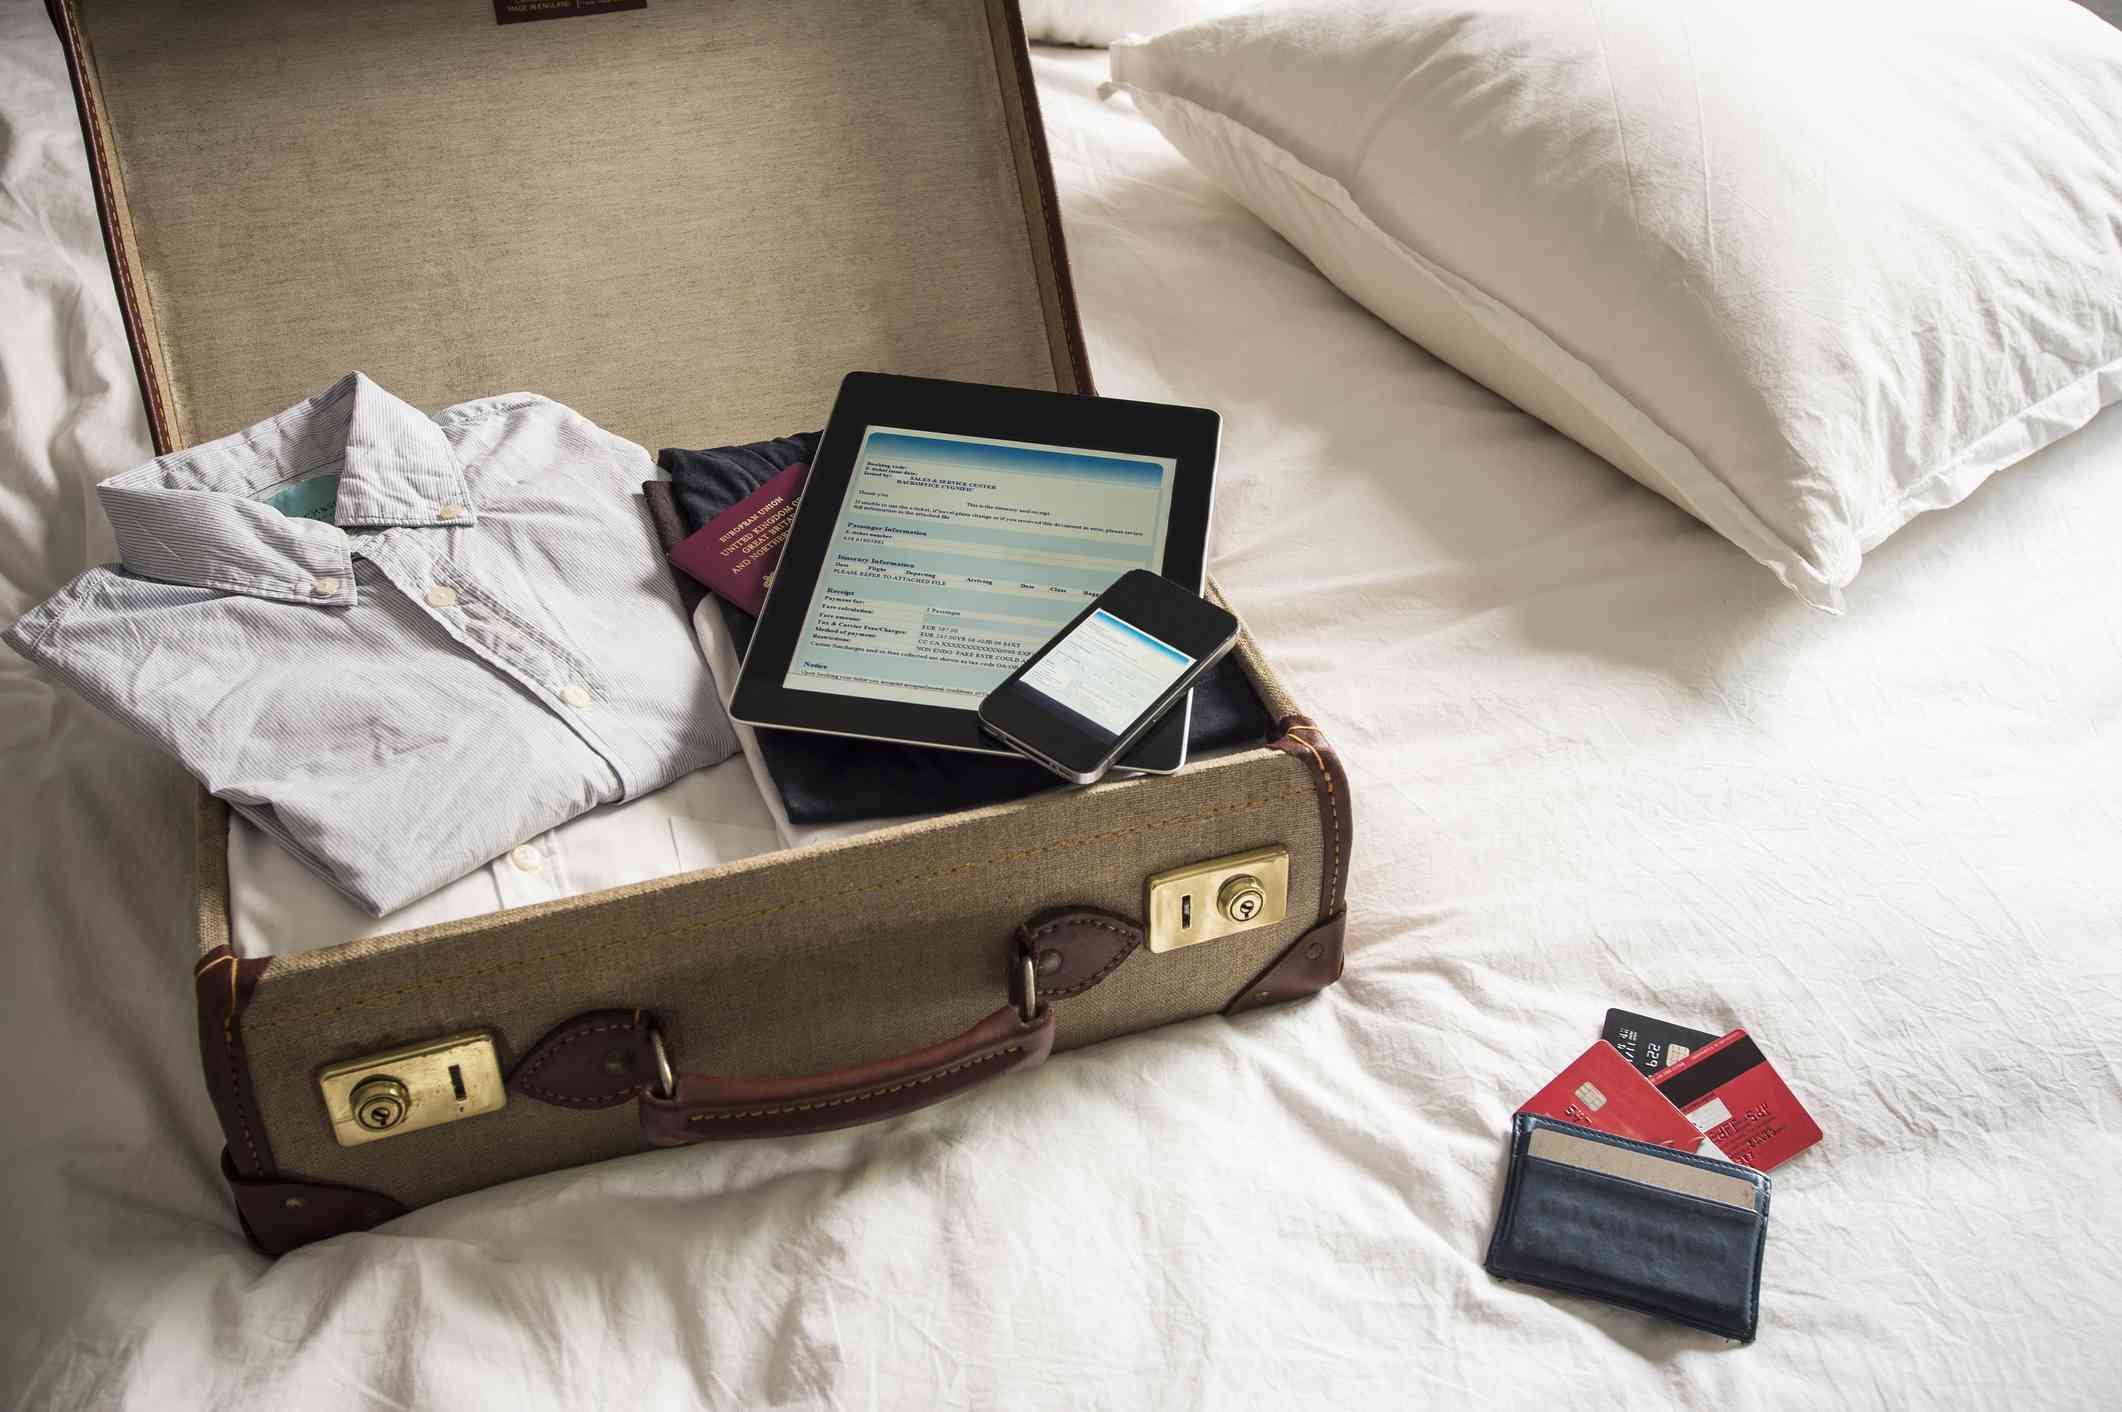 Open suitcase on bed with digital tablet and phone